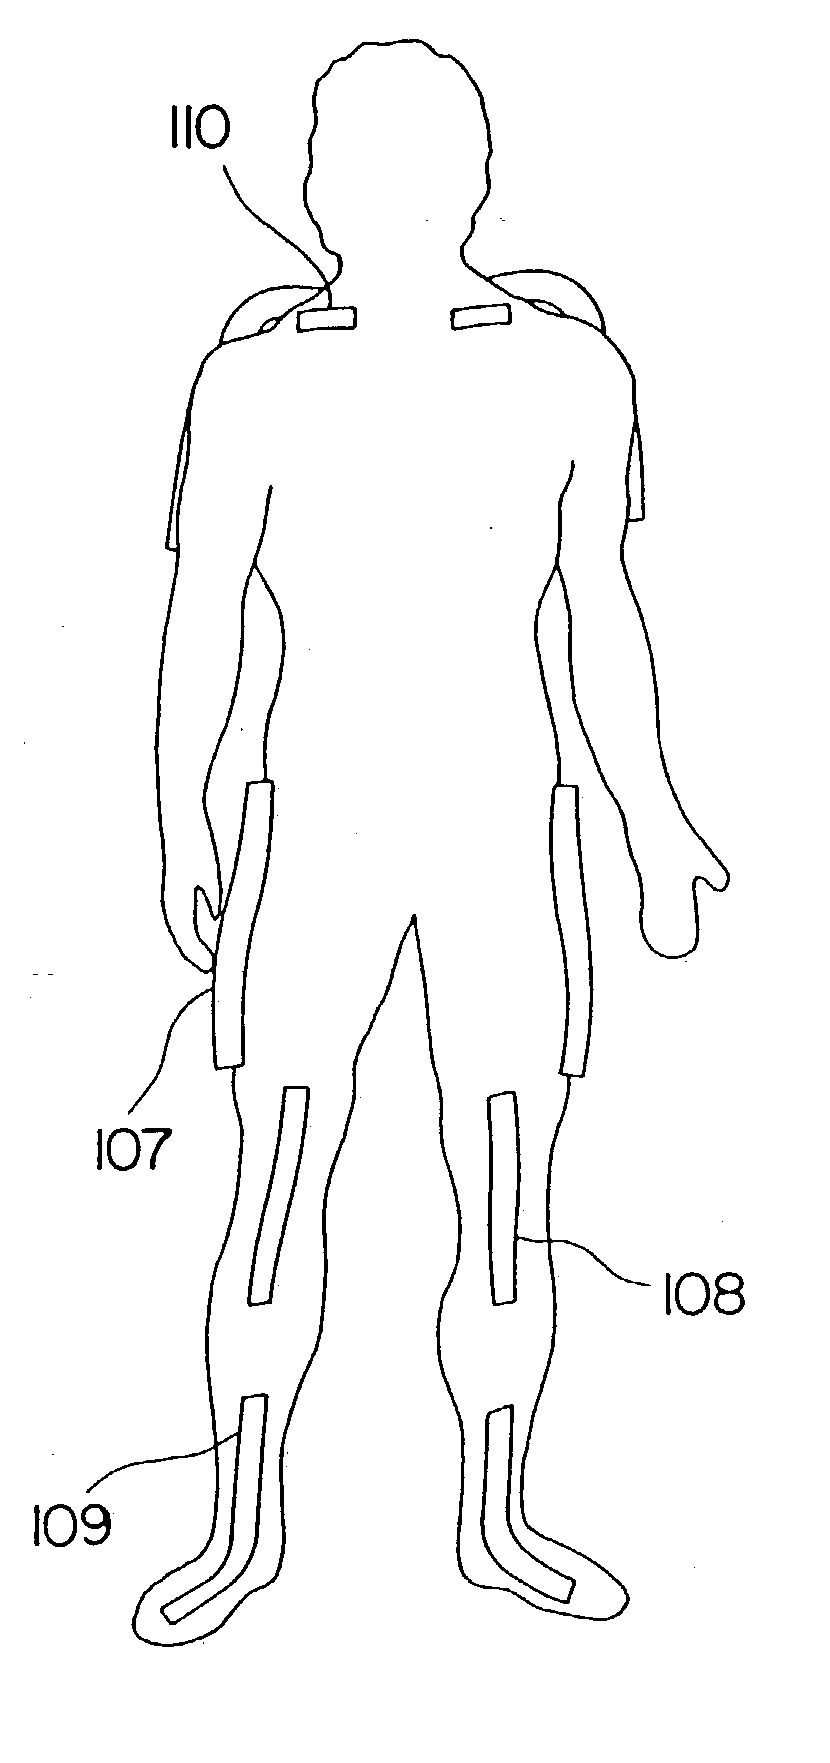 Goniometer-based body-tracking device and method